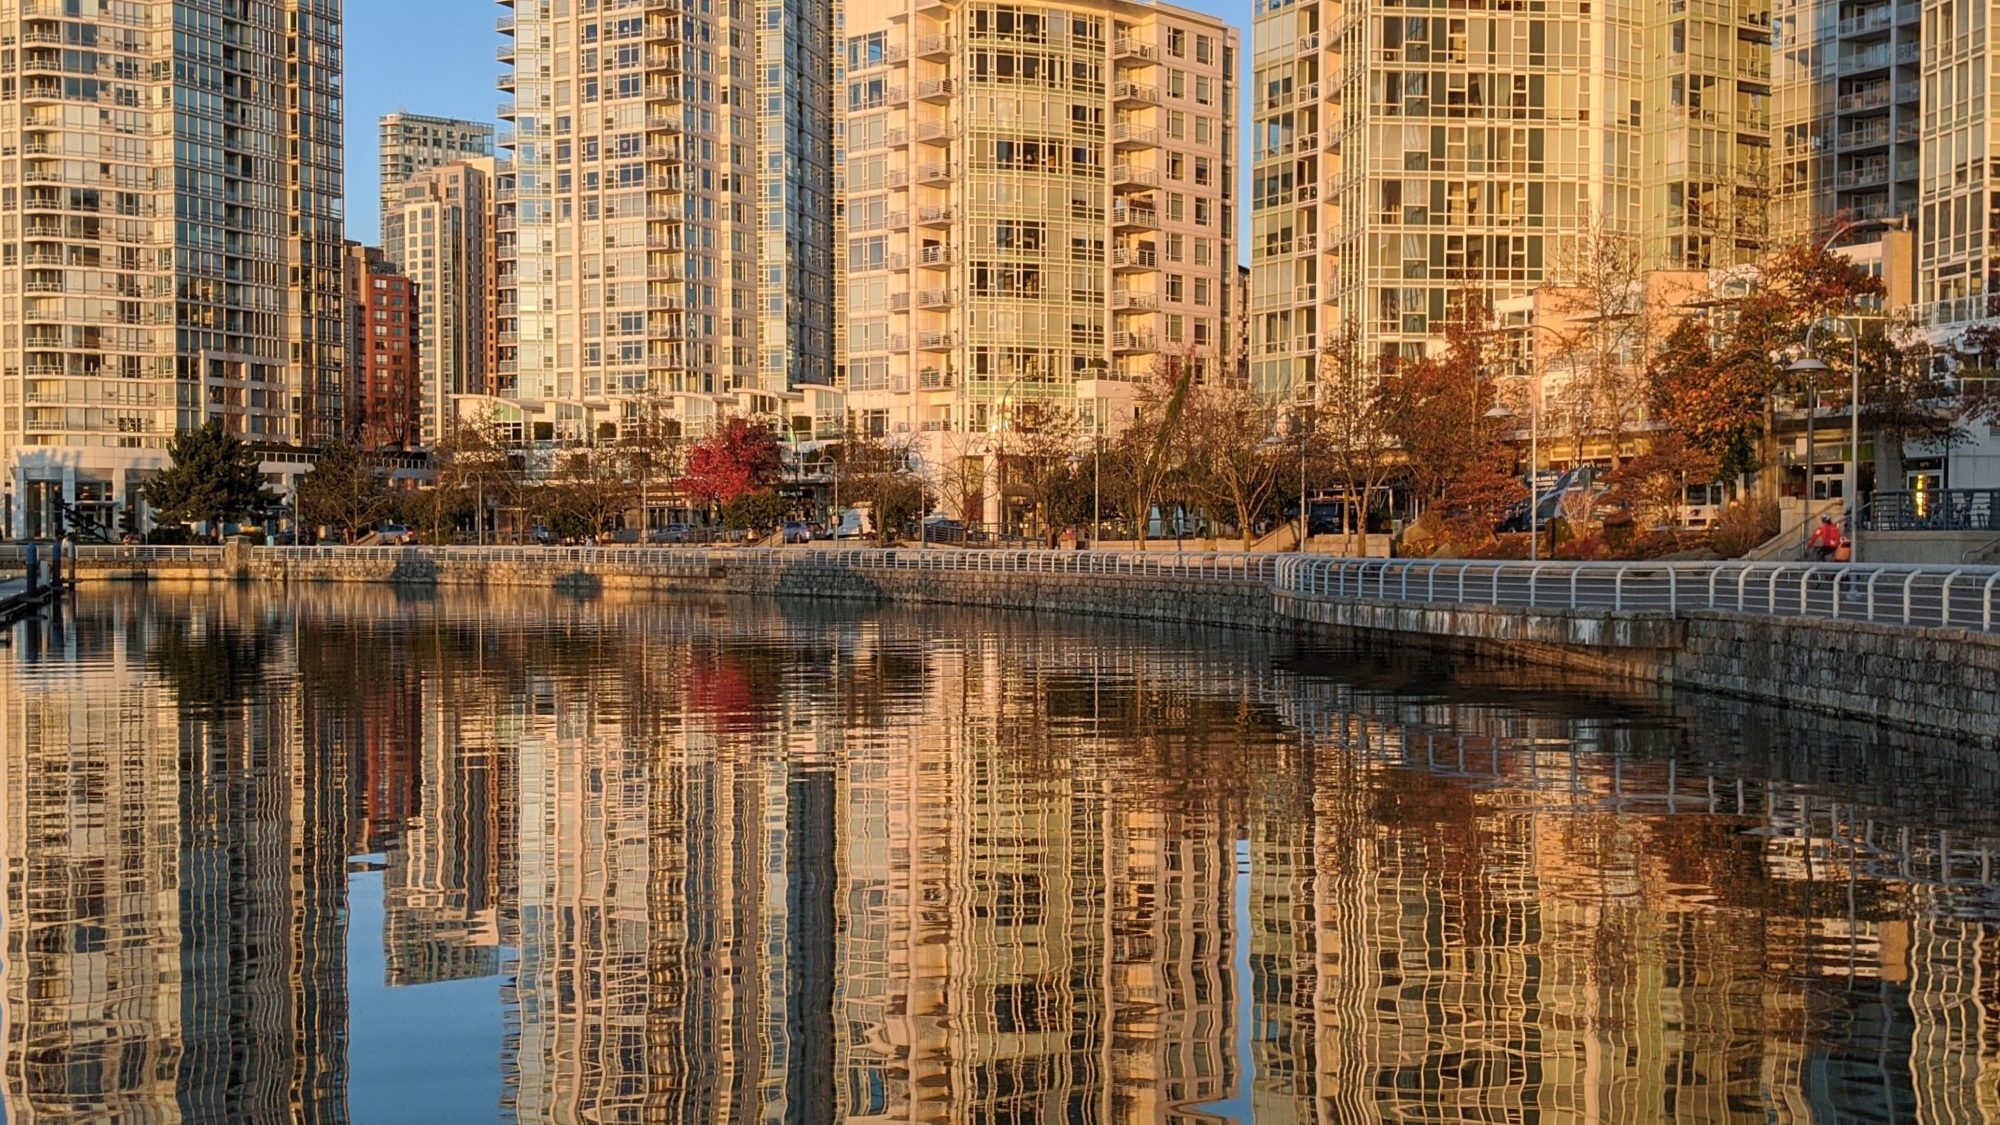 Reflected towers on seawall